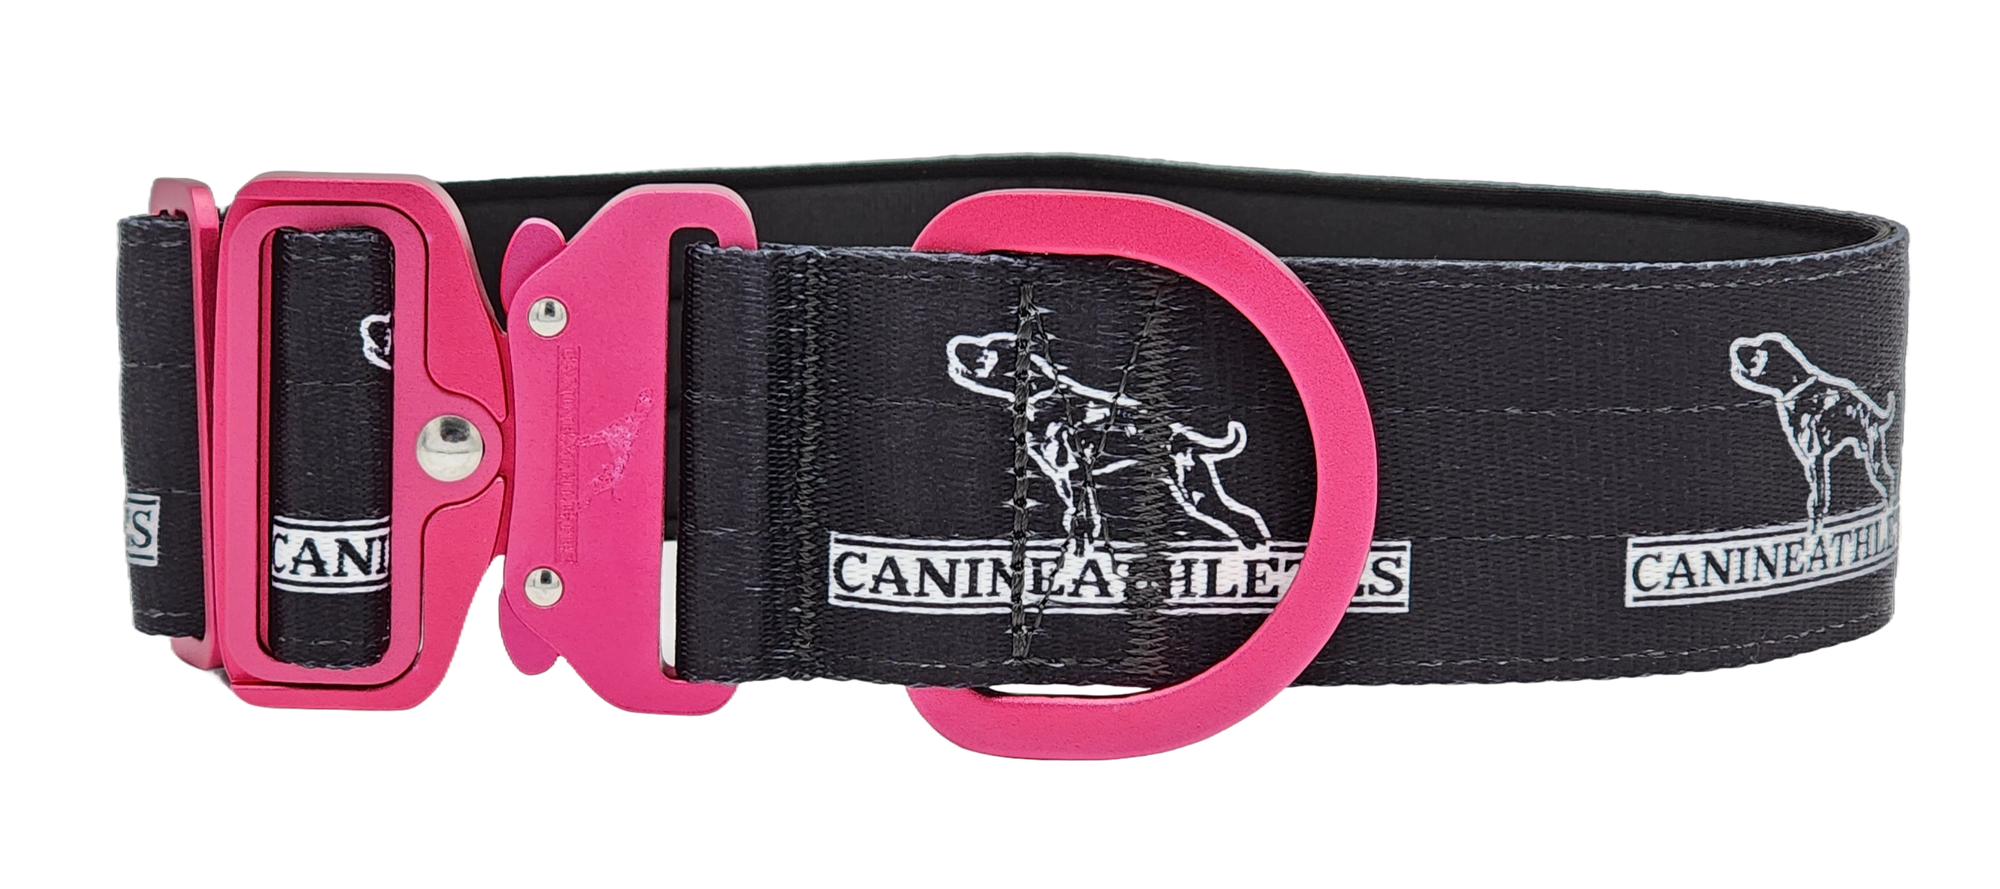 canine-athletes-sport-hd-v2-quick-release-dog-collar-hot-pink